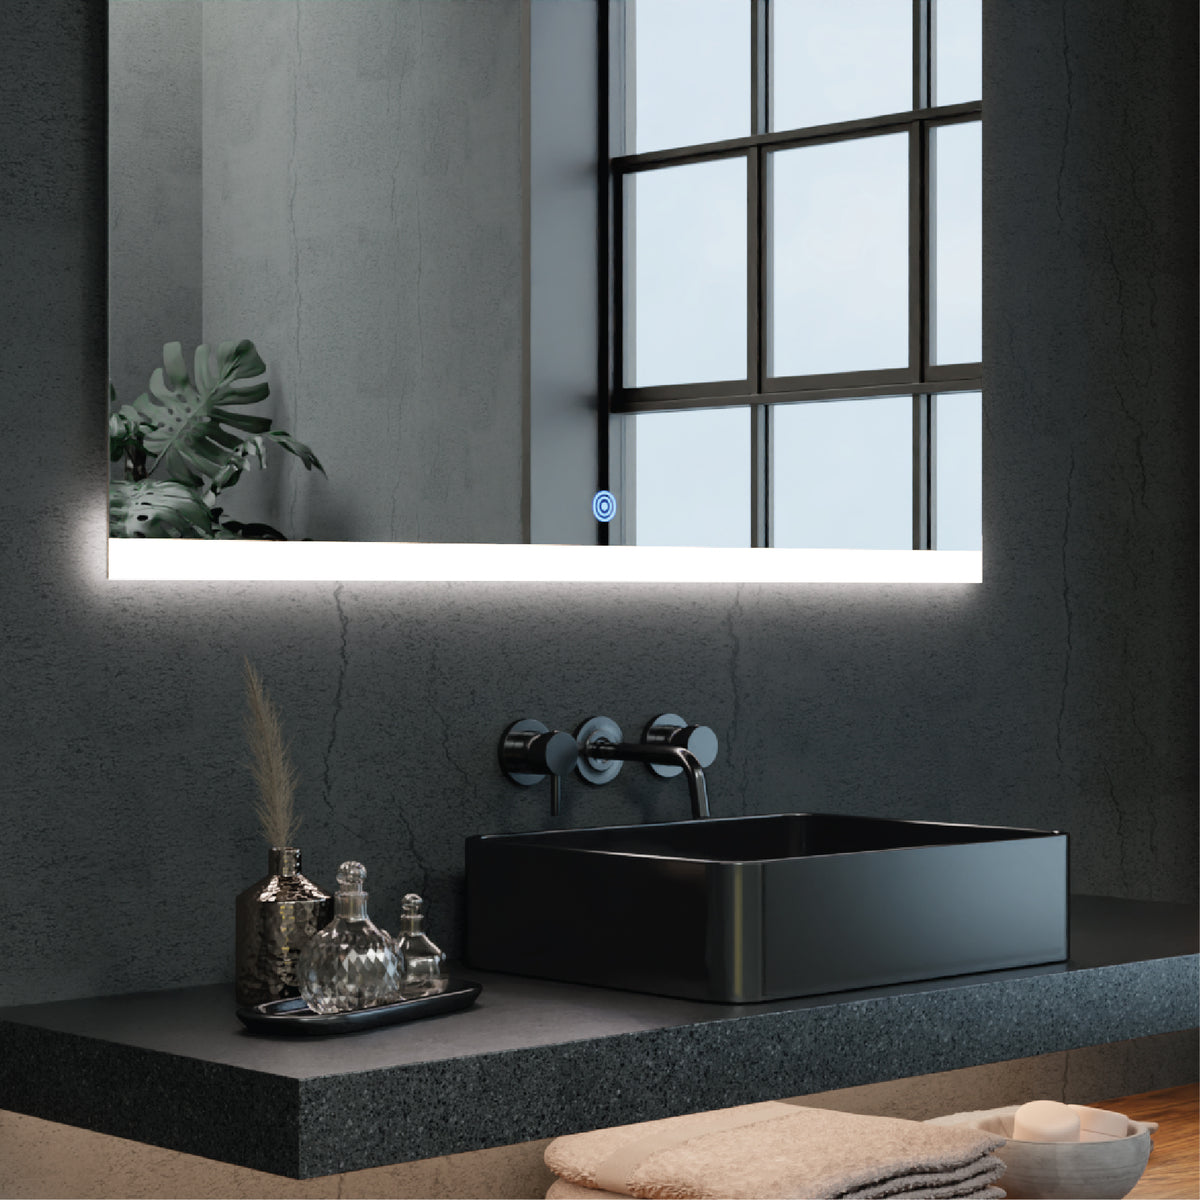 Illuminate your space with the Titan LED Mirror's customisable light temperature settings, creating an inviting and comfortable atmosphere. 